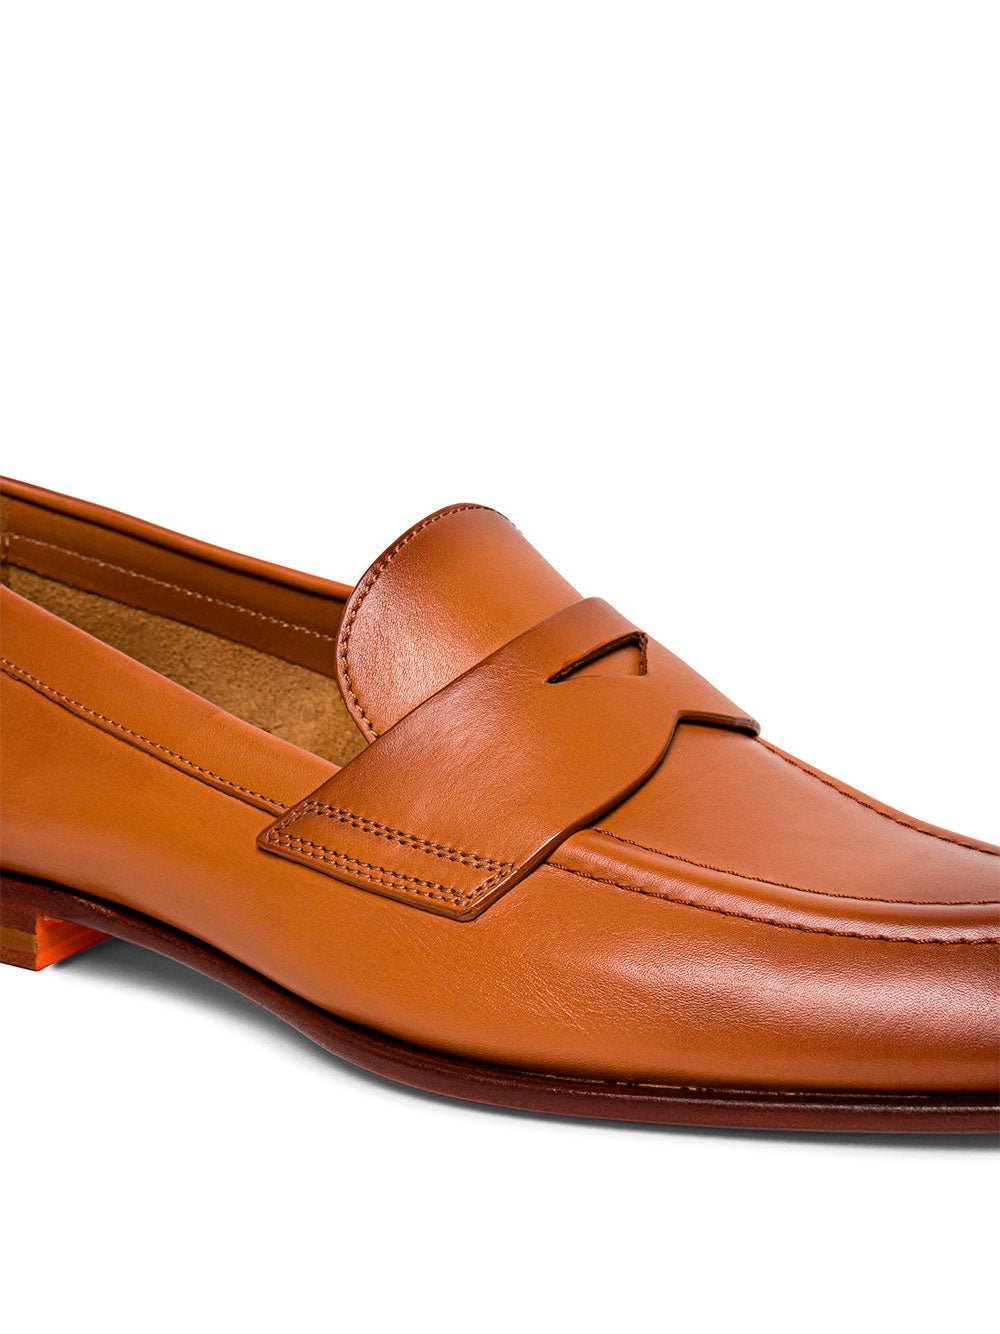 SantoniLeather Loafers at Fashion Clinic